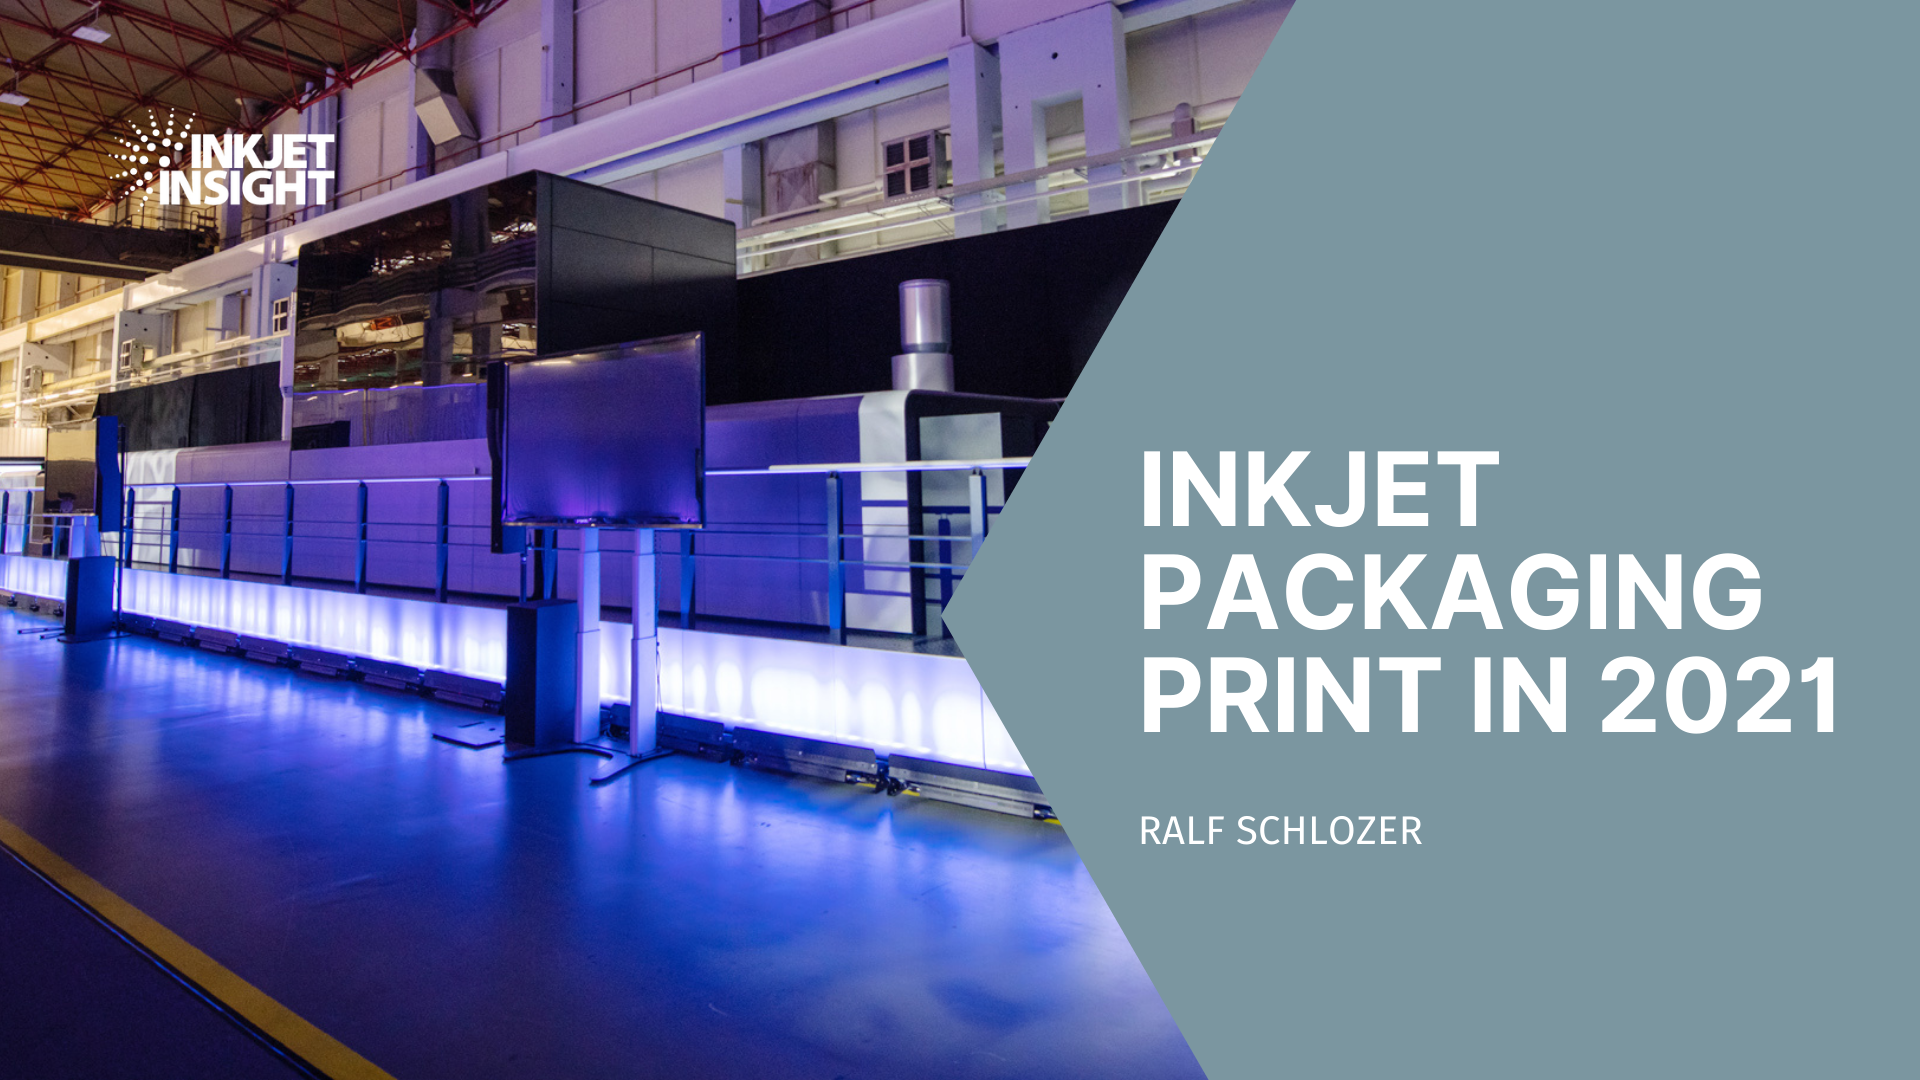 Featured image for “Inkjet Packaging Print in 2021”